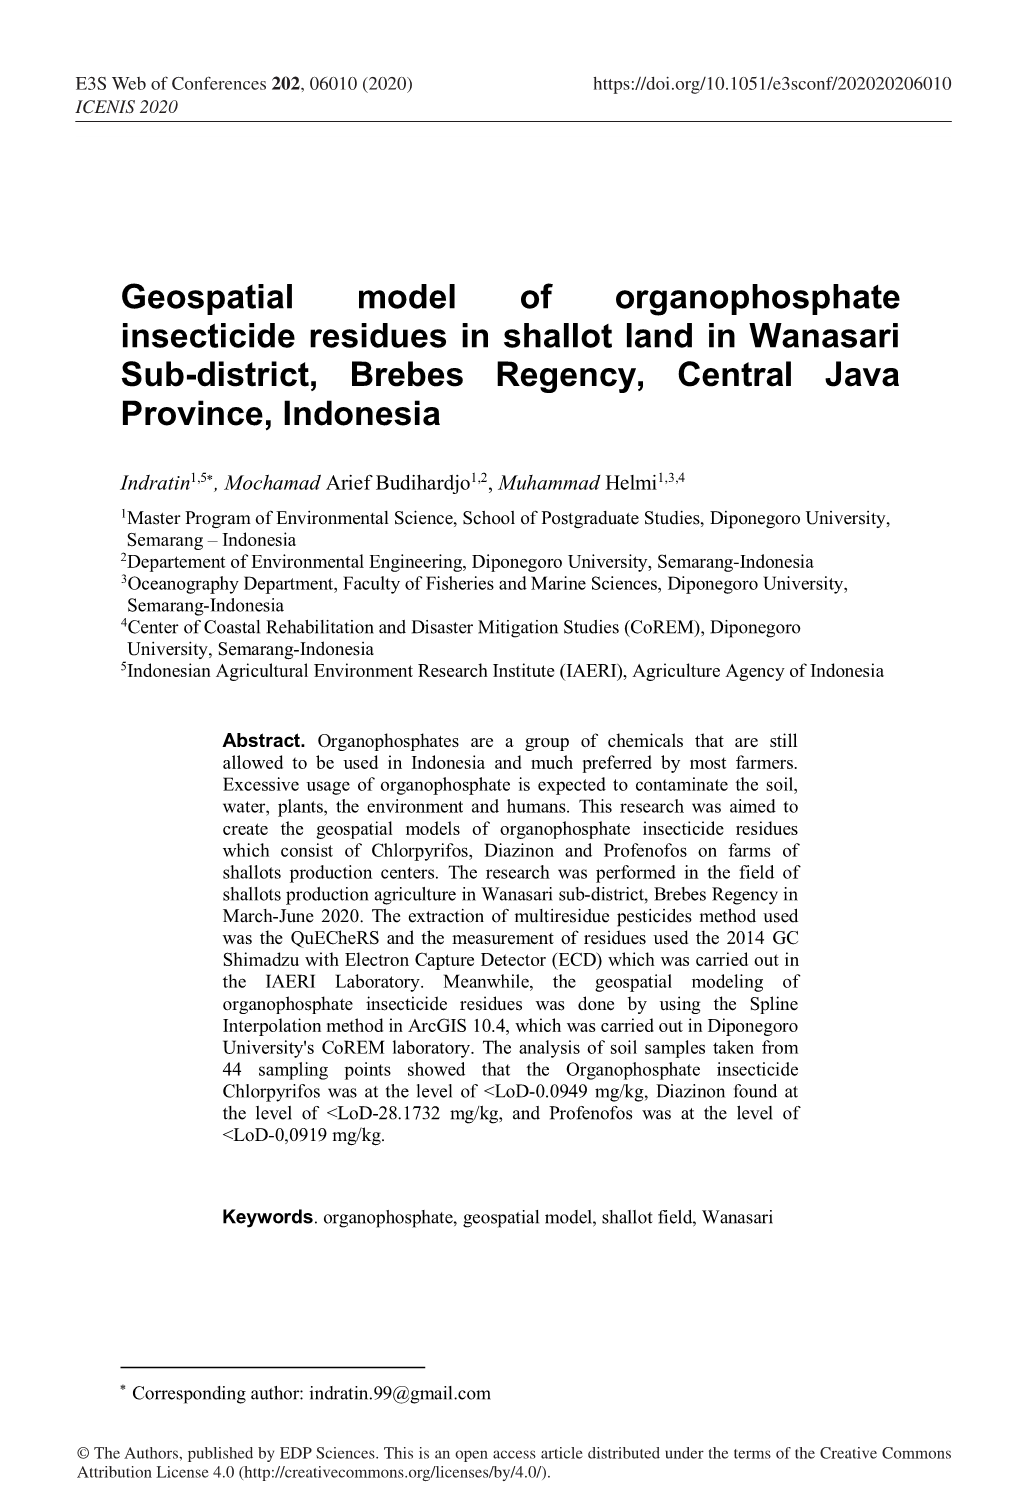 Geospatial Model of Organophosphate Insecticide Residues in Shallot Land in Wanasari Sub-District, Brebes Regency, Central Java Province, Indonesia